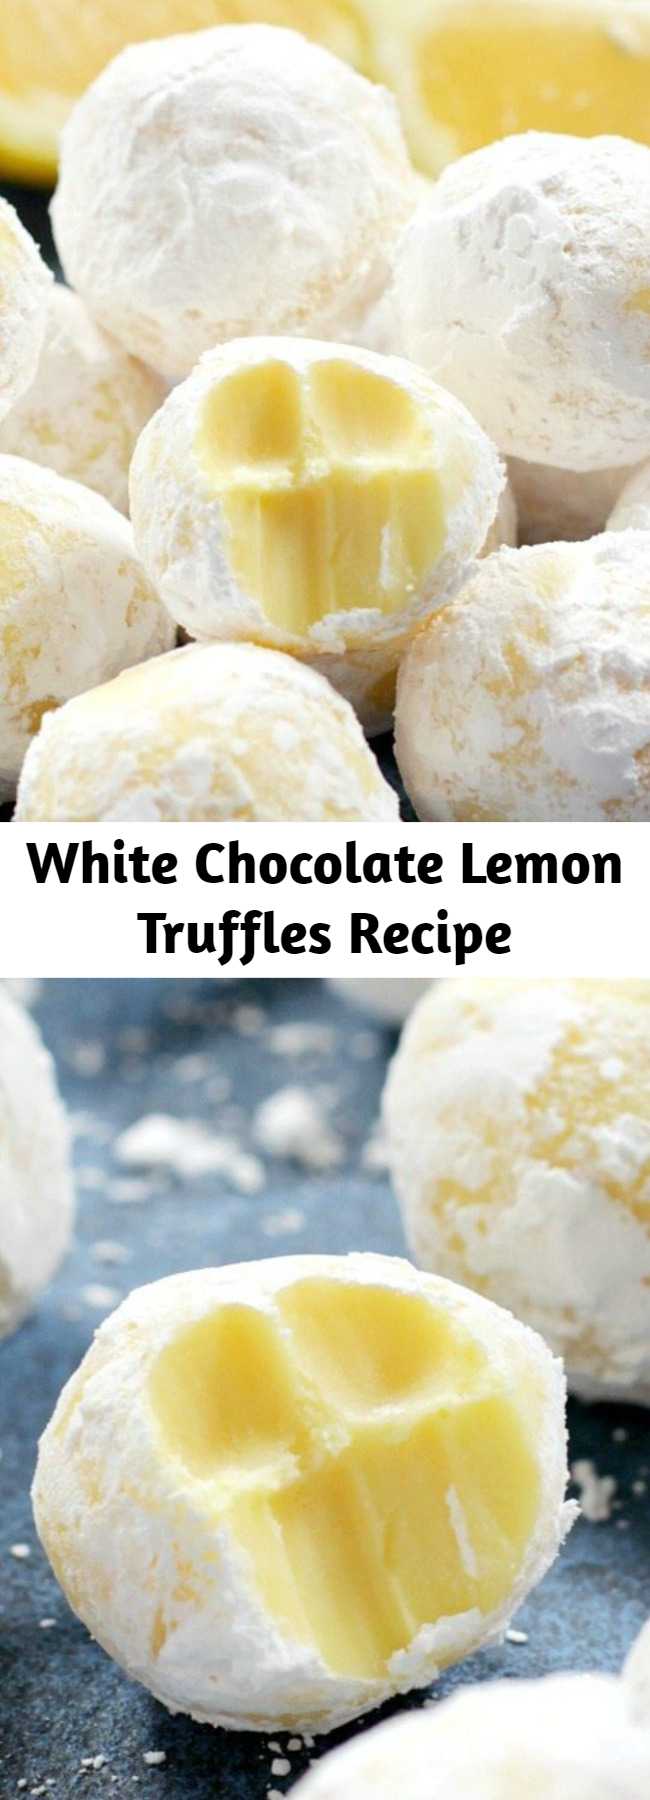 White Chocolate Lemon Truffles Recipe - These creamy White Chocolate Lemon Truffles will become a new holiday favorite! Perfect for gift giving or including on a cookie tray.